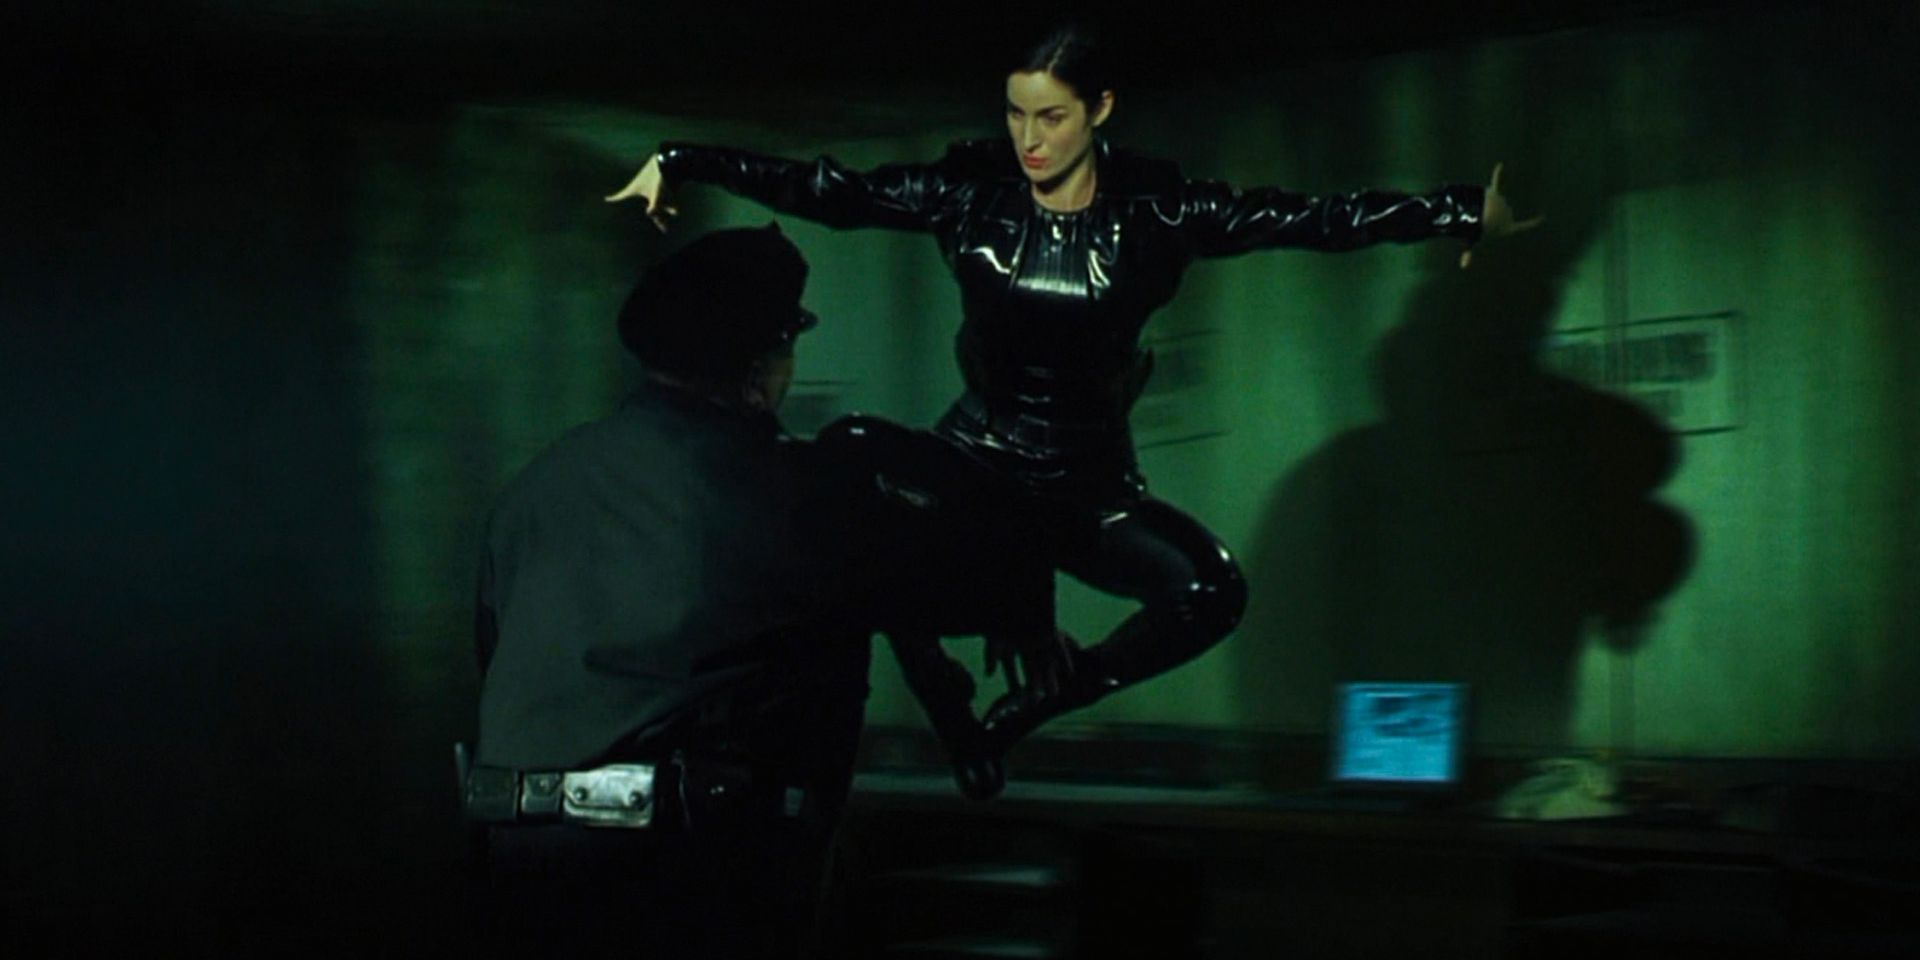 A woman in a leather outfit jumps and hovers in the air before fly-kicking a cop.